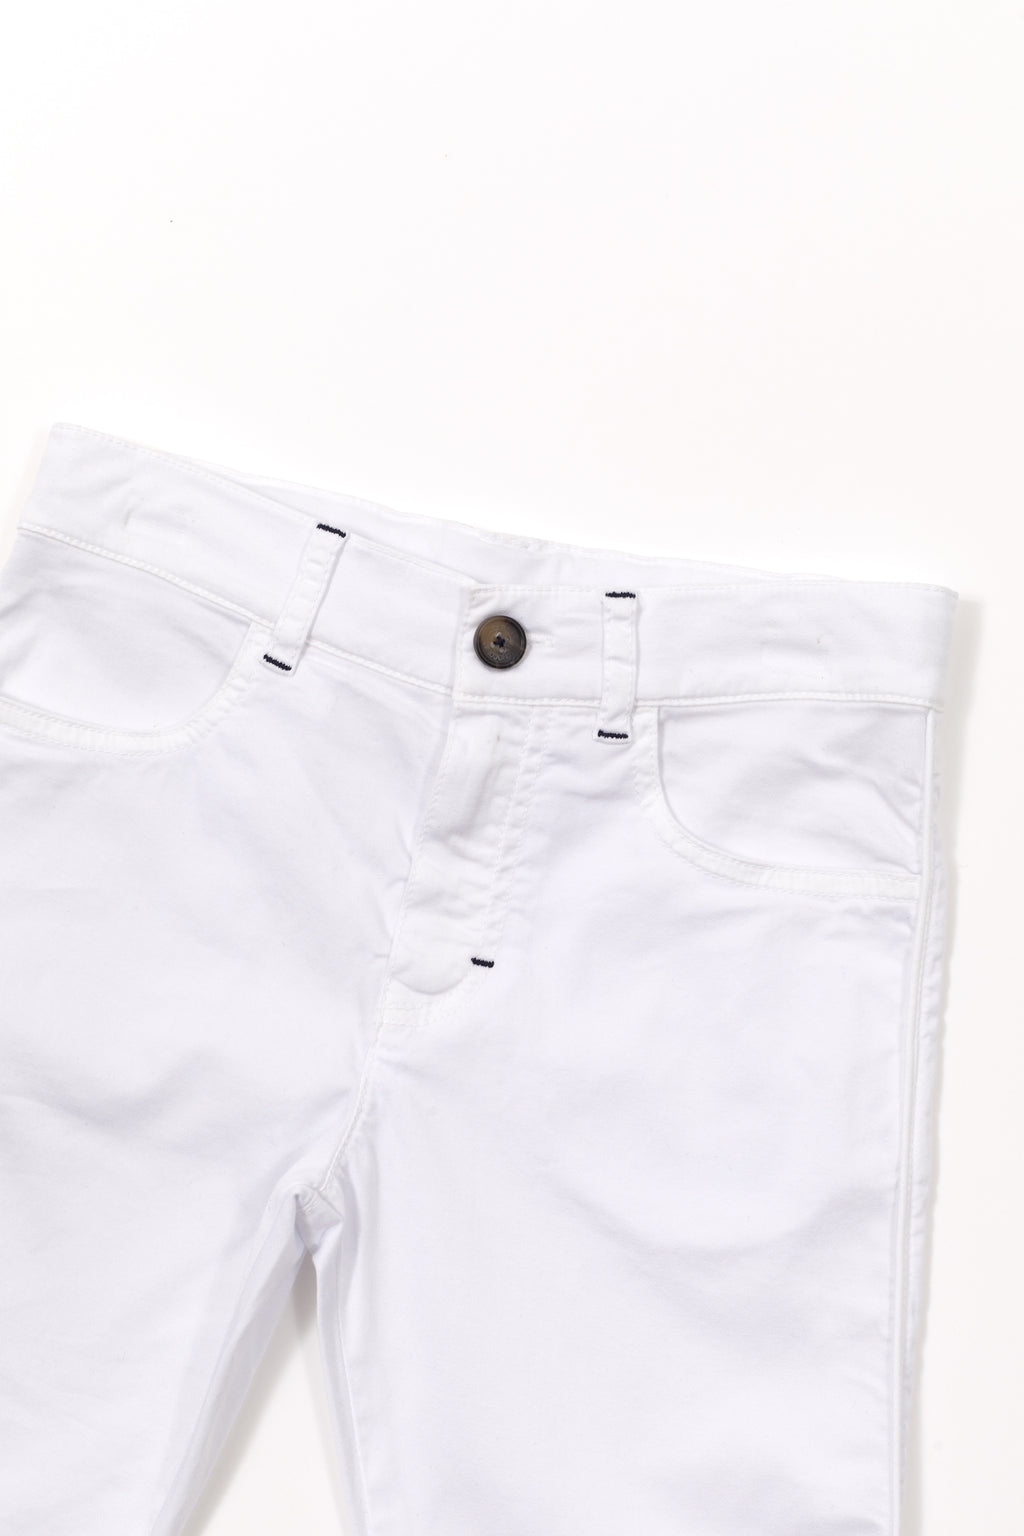 Trousers - Twill White